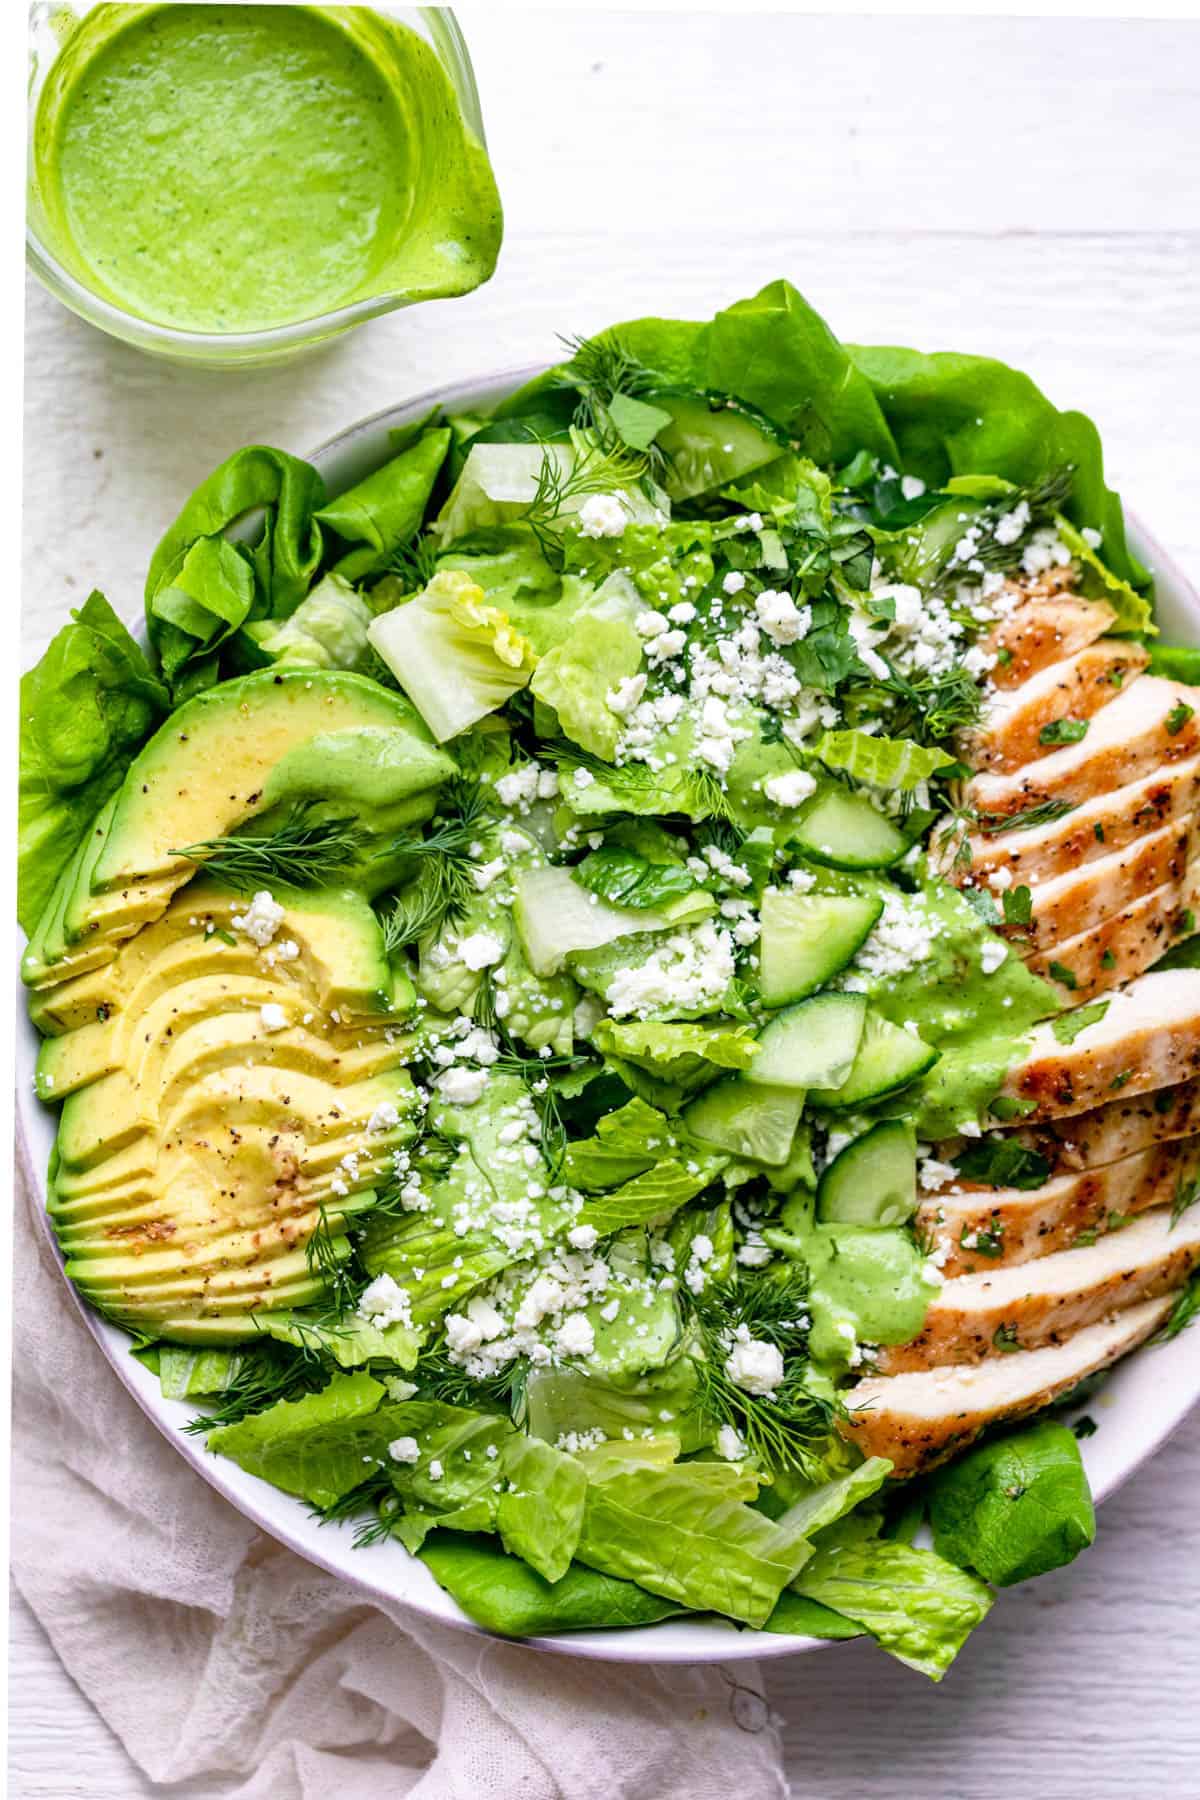 This Green Goddess Salad is a healthy, fresh & light salad that's antioxidants rich but also flavor rich. It's served with an easy cilantro yogurt dressing!